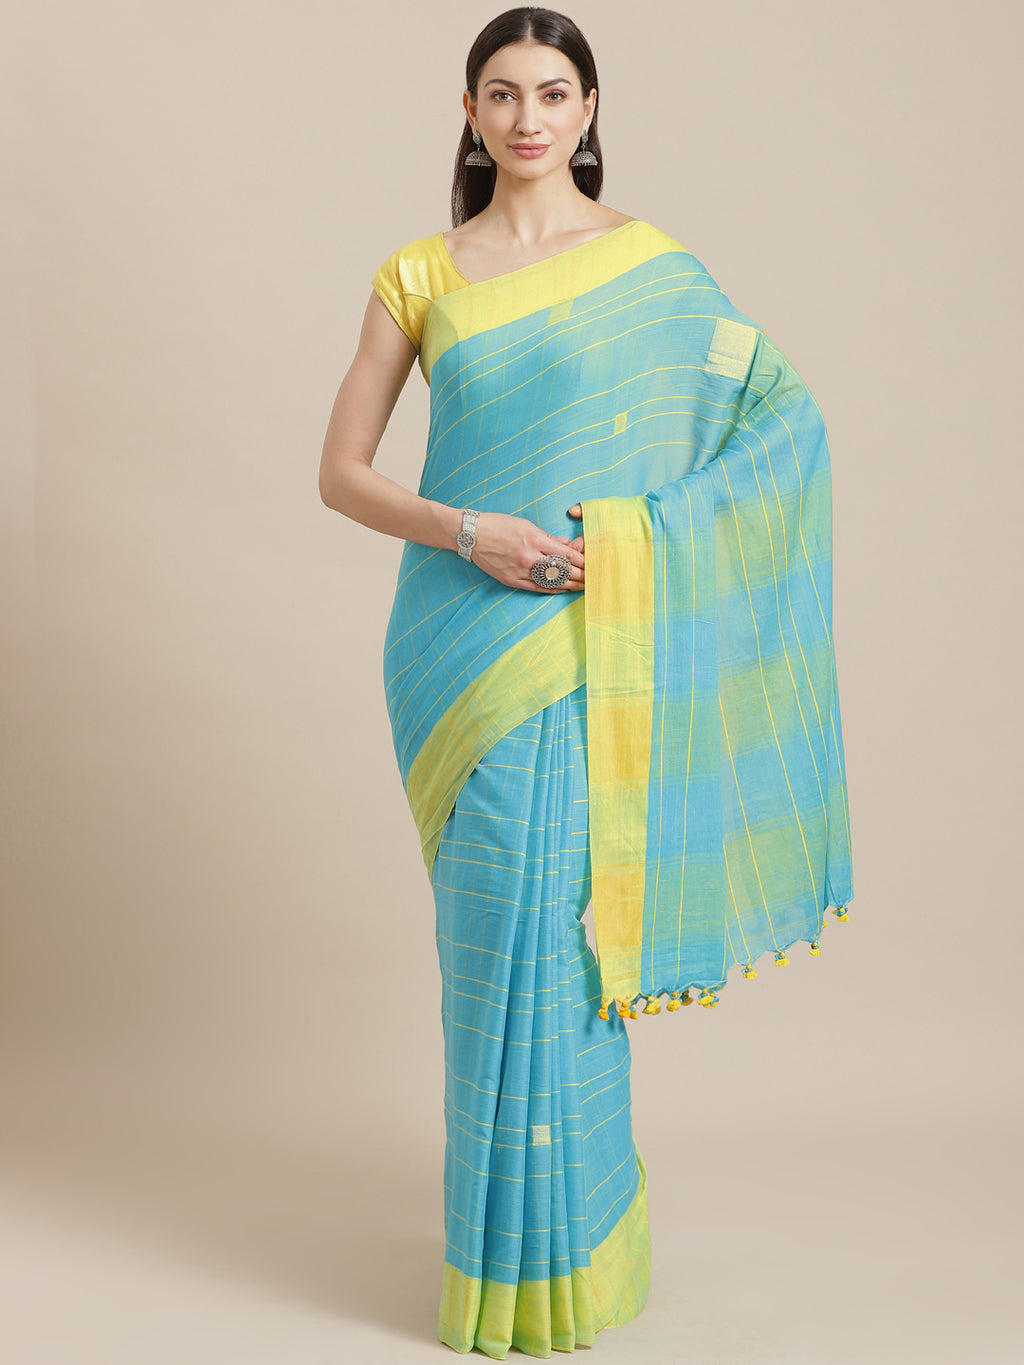 Blue and Green, Kalakari India Cotton Blue Hand crafted saree with blouse SHBESA0024-Saree-Kalakari India-SHBESA0024-Bengal, Cotton, Geographical Indication, Hand Crafted, Heritage Prints, Ikkat, Natural Dyes, Red, Sarees, Sustainable Fabrics, Woven, Yellow-[Linen,Ethnic,wear,Fashionista,Handloom,Handicraft,Indigo,blockprint,block,print,Cotton,Chanderi,Blue, latest,classy,party,bollywood,trendy,summer,style,traditional,formal,elegant,unique,style,hand,block,print, dabu,booti,gift,present,glamoro